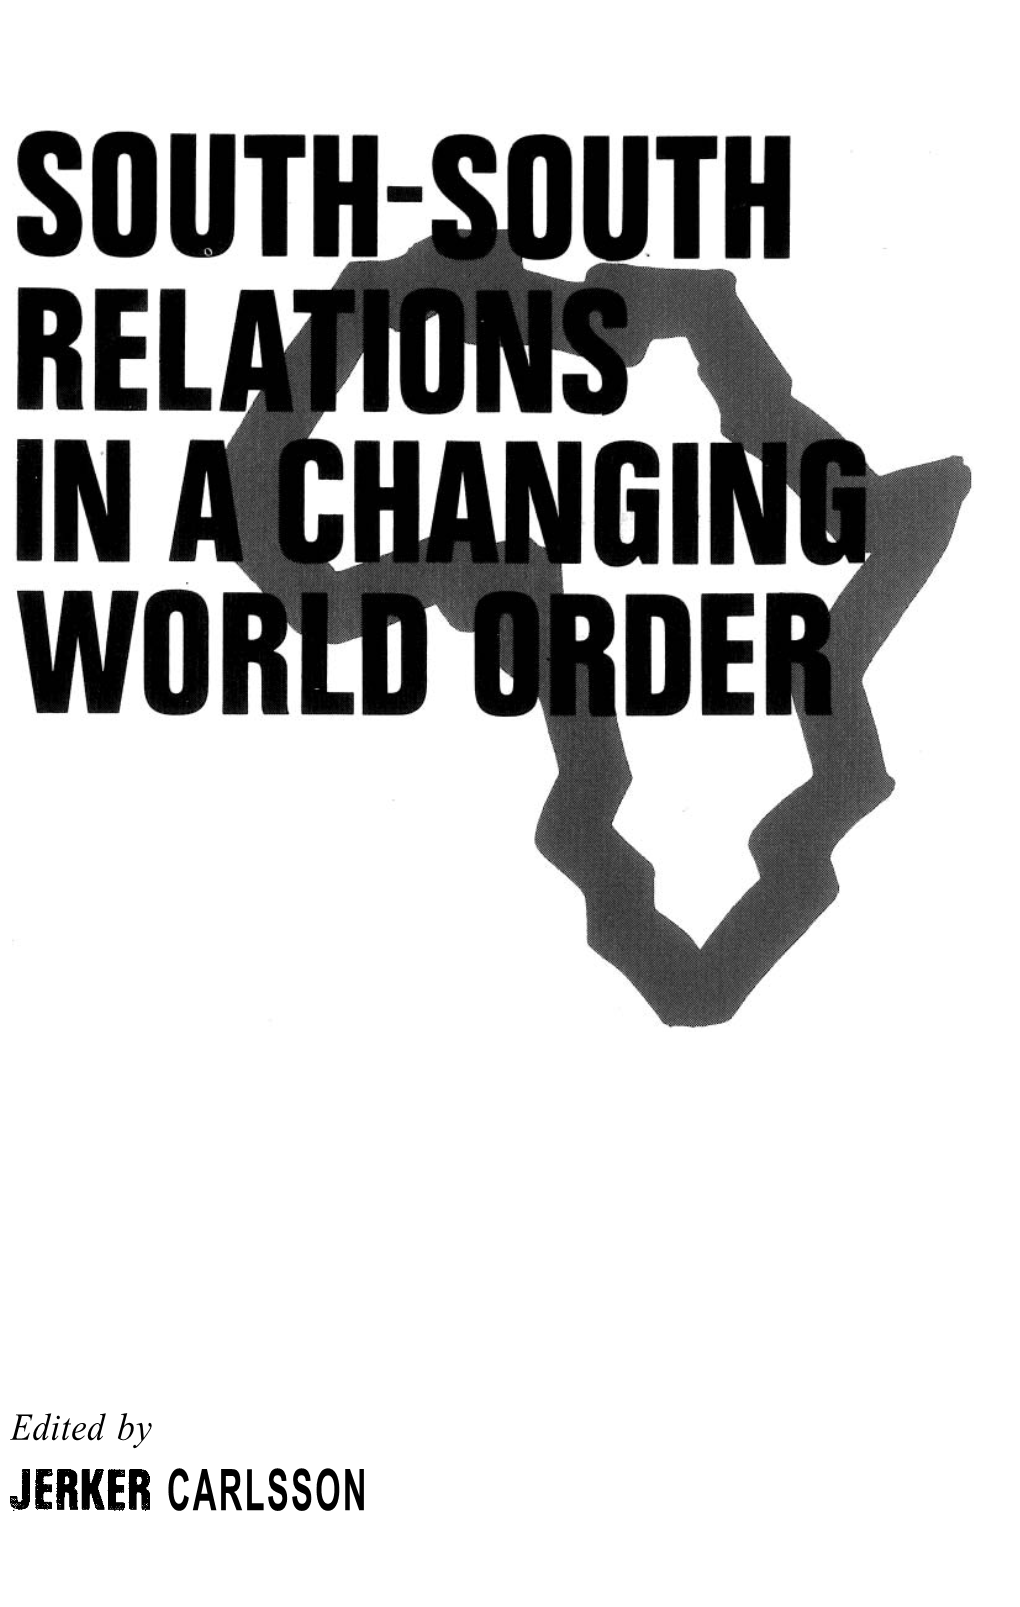 JERKER CARLSSON SOUTH-SOUTH RELATIONS in a CHANGING WORLD ORDER Edited by JERKER CARLSSON